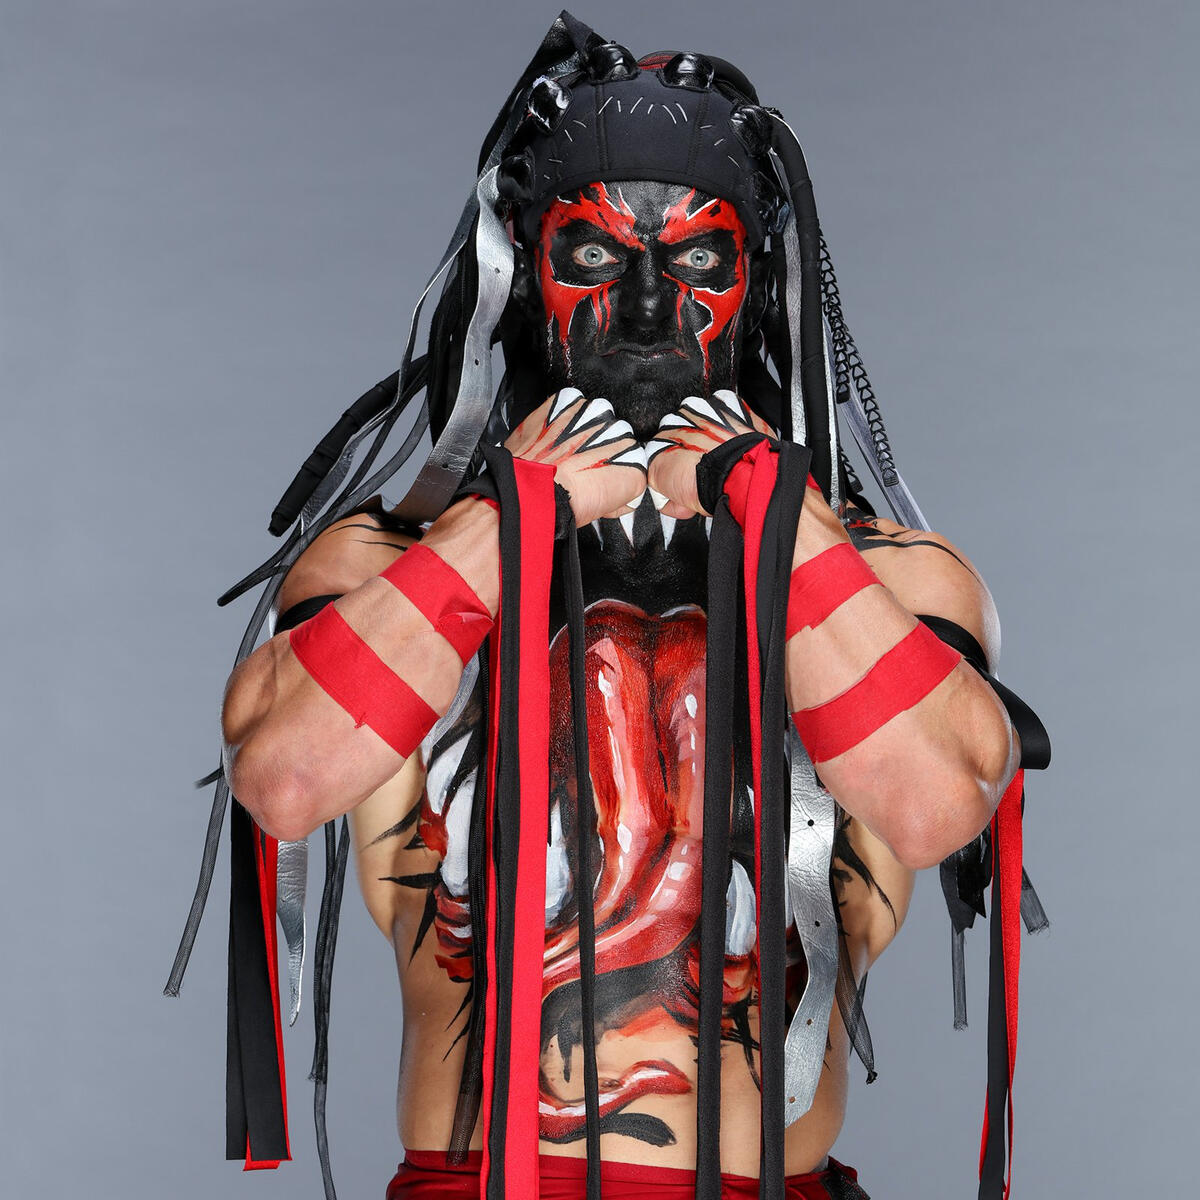 Check Out An Awesome Gallery Of Photos Featuring Finn Balor's